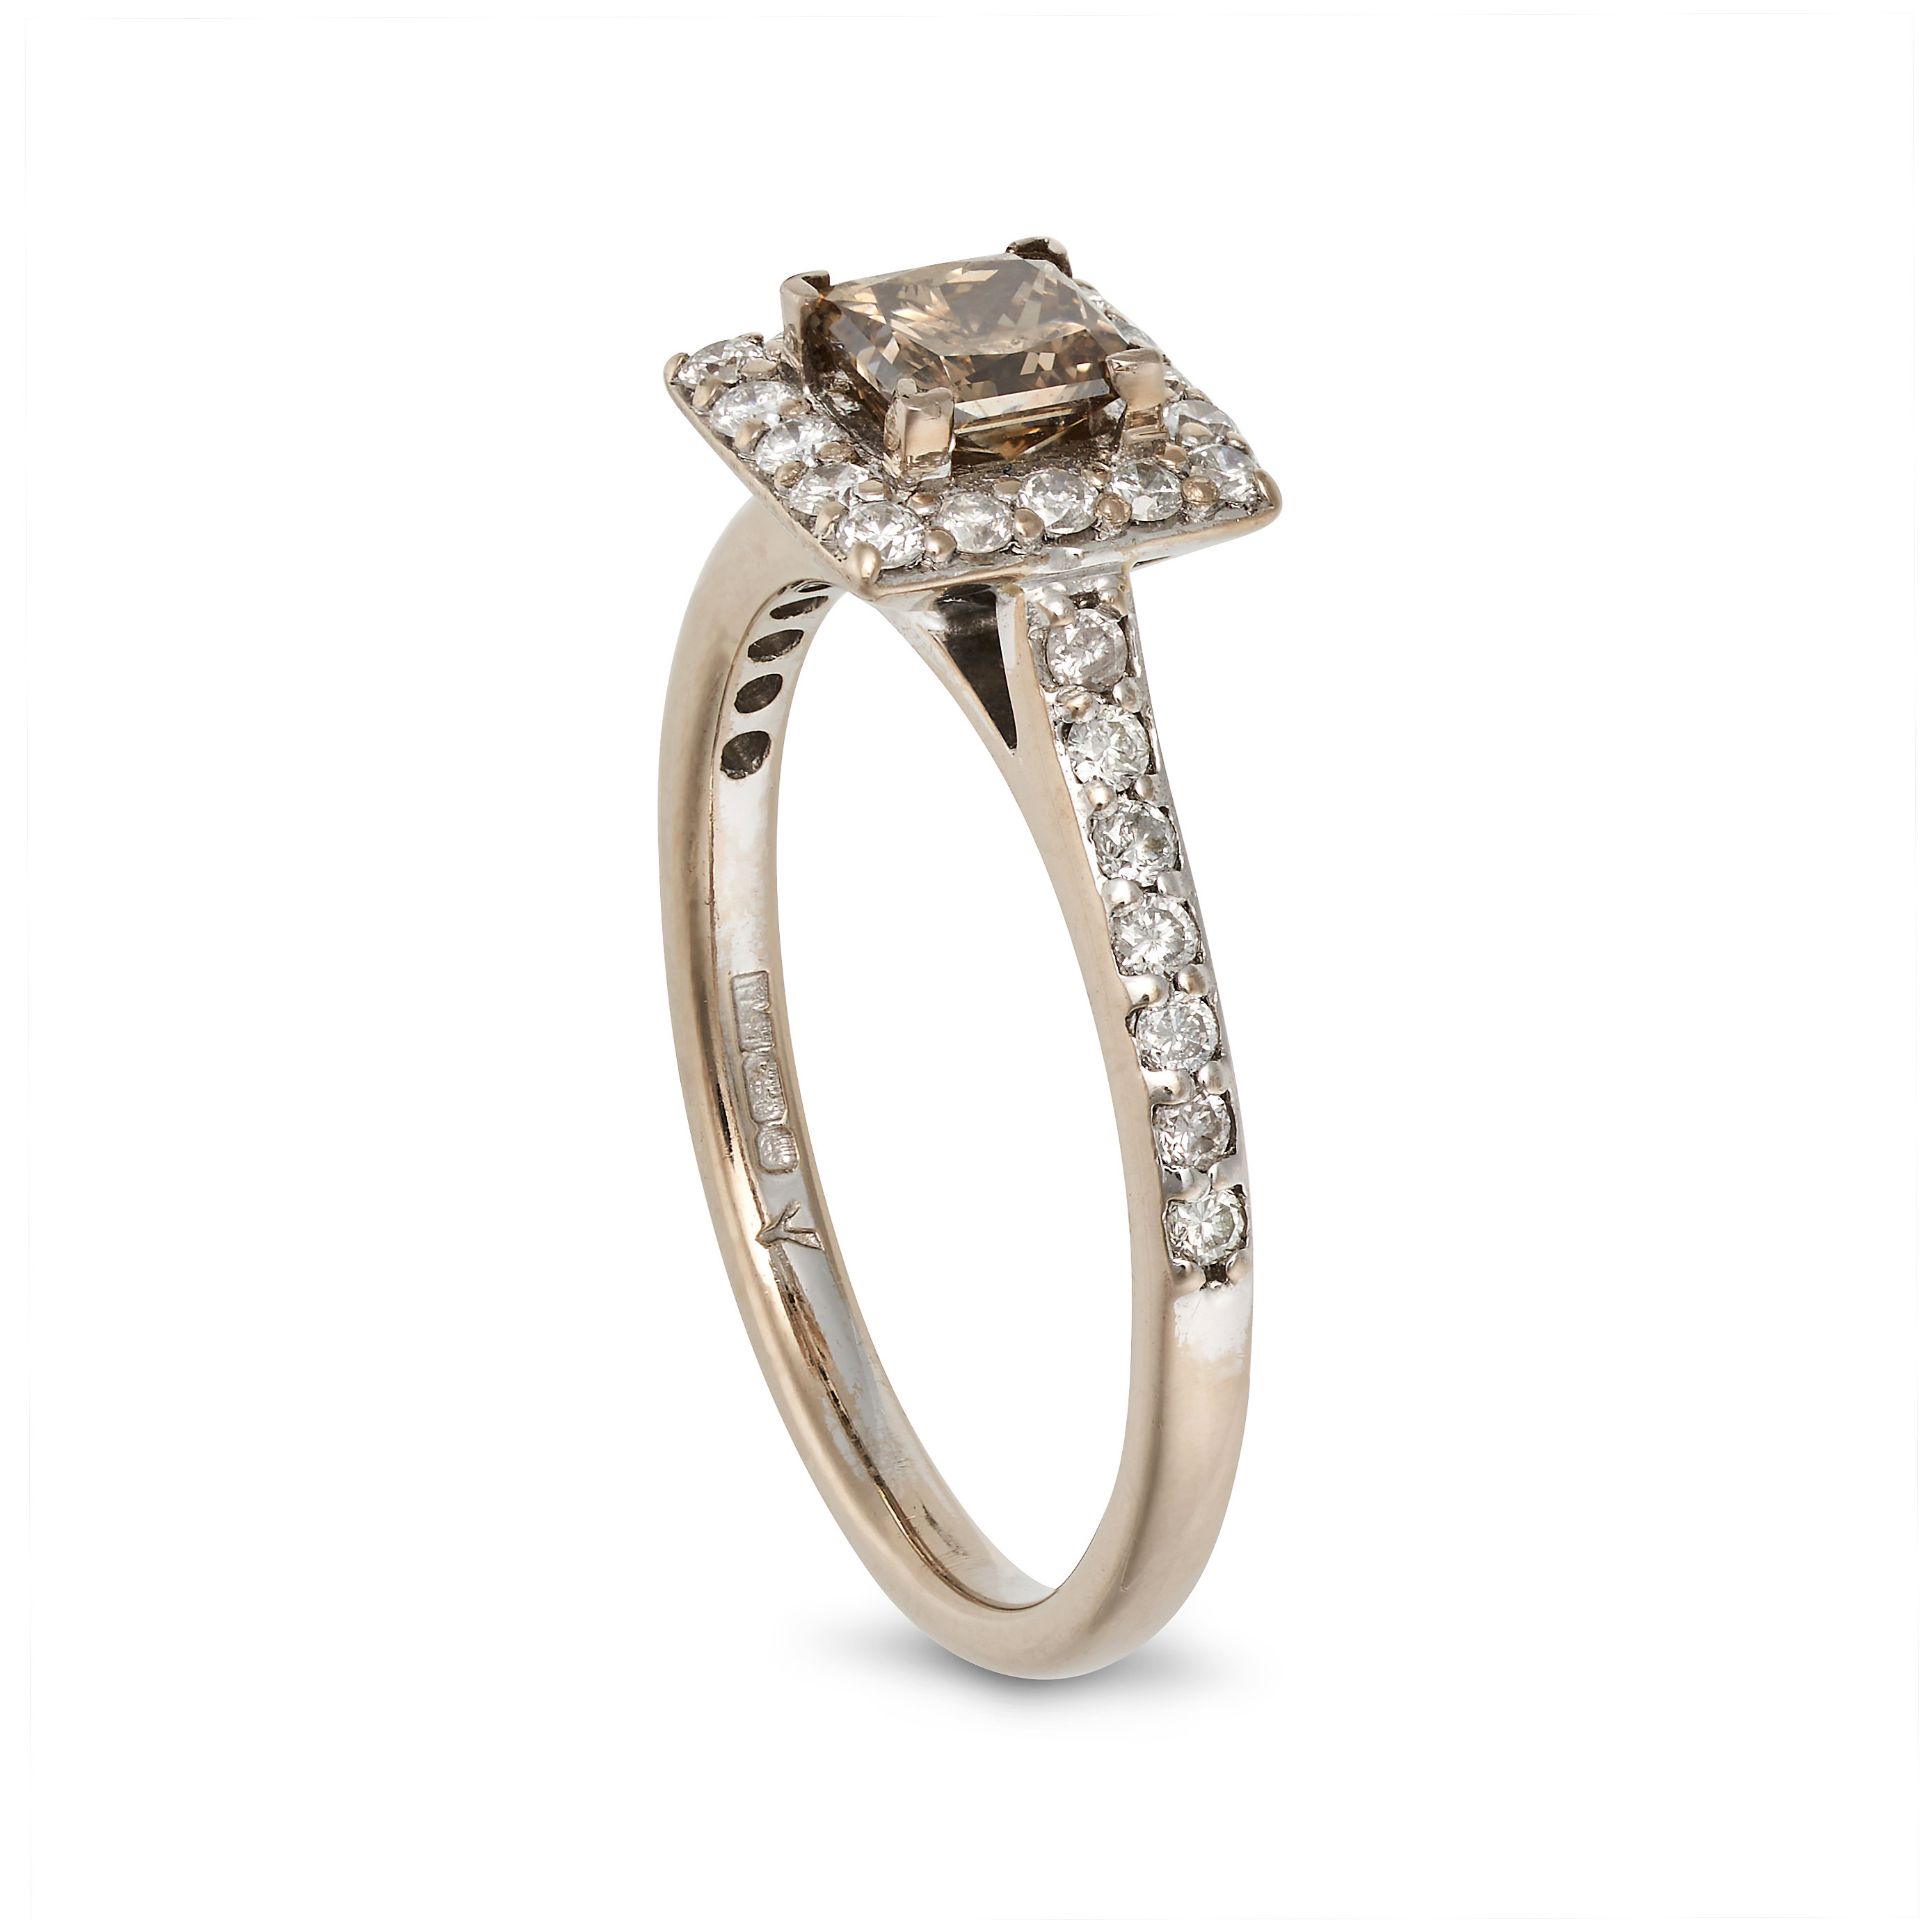 A BROWN AND WHITE DIAMOND CLUSTER RING in 18ct white gold, set with a princess cut brown diamond ... - Image 2 of 2